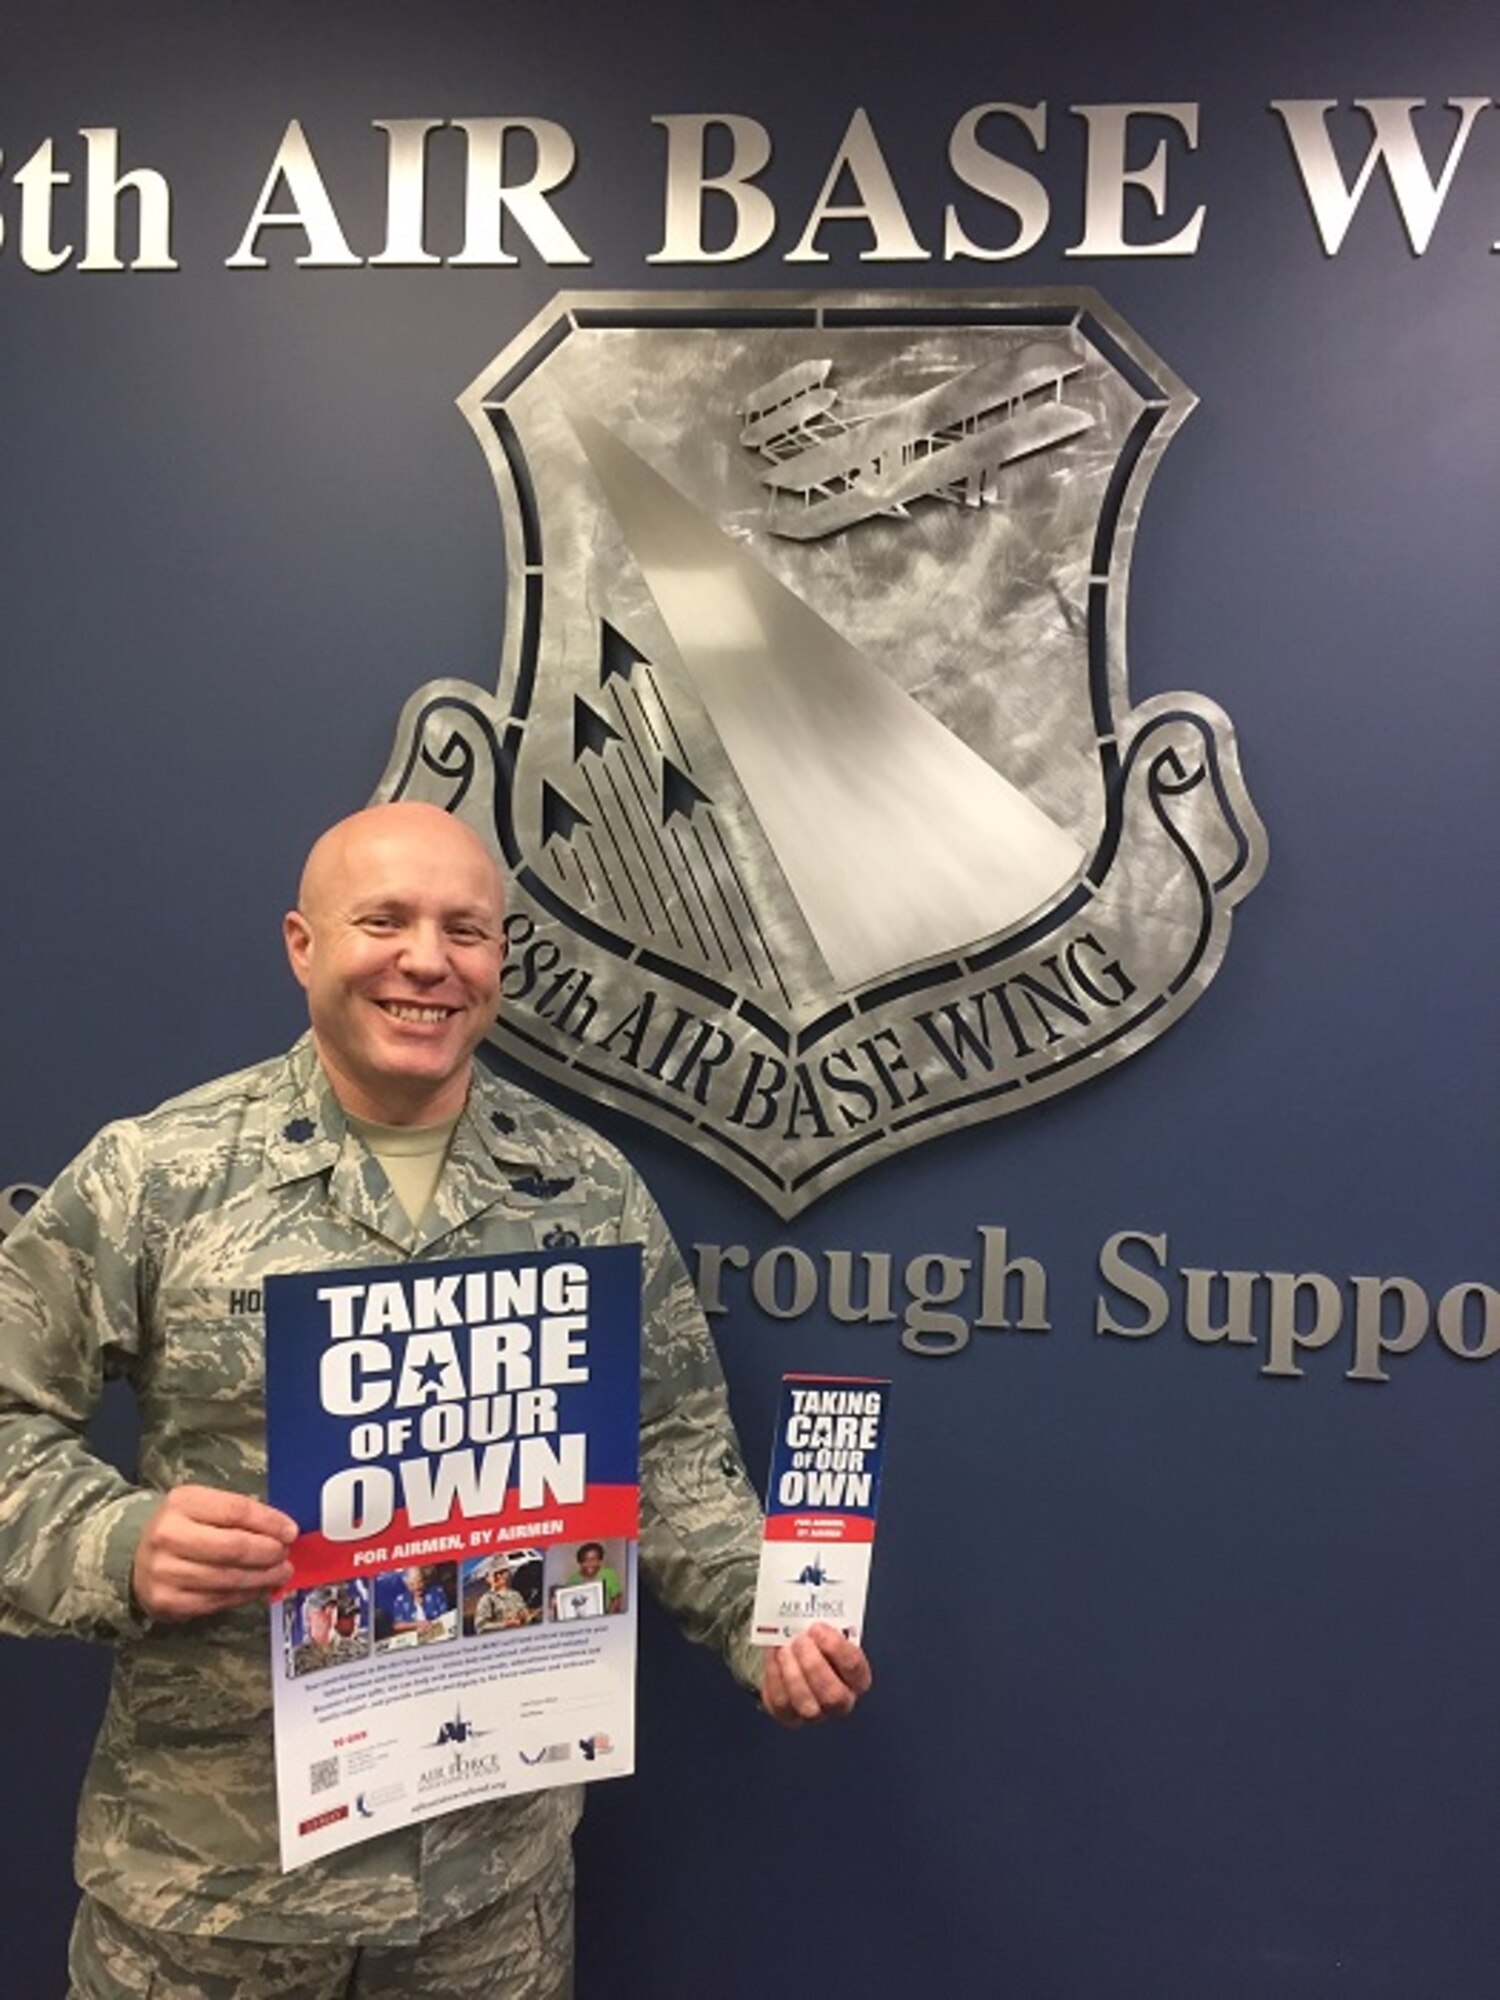 Lt. Col. William Holl, 88th Mission Support Group deputy commander, is serving as the installation project officer for the 47th annual Air Force Assistance Fund campaign at Wright-Patterson Air Force Base from March 2 to April 10. (Skywrighter photo/Amy Rollins)